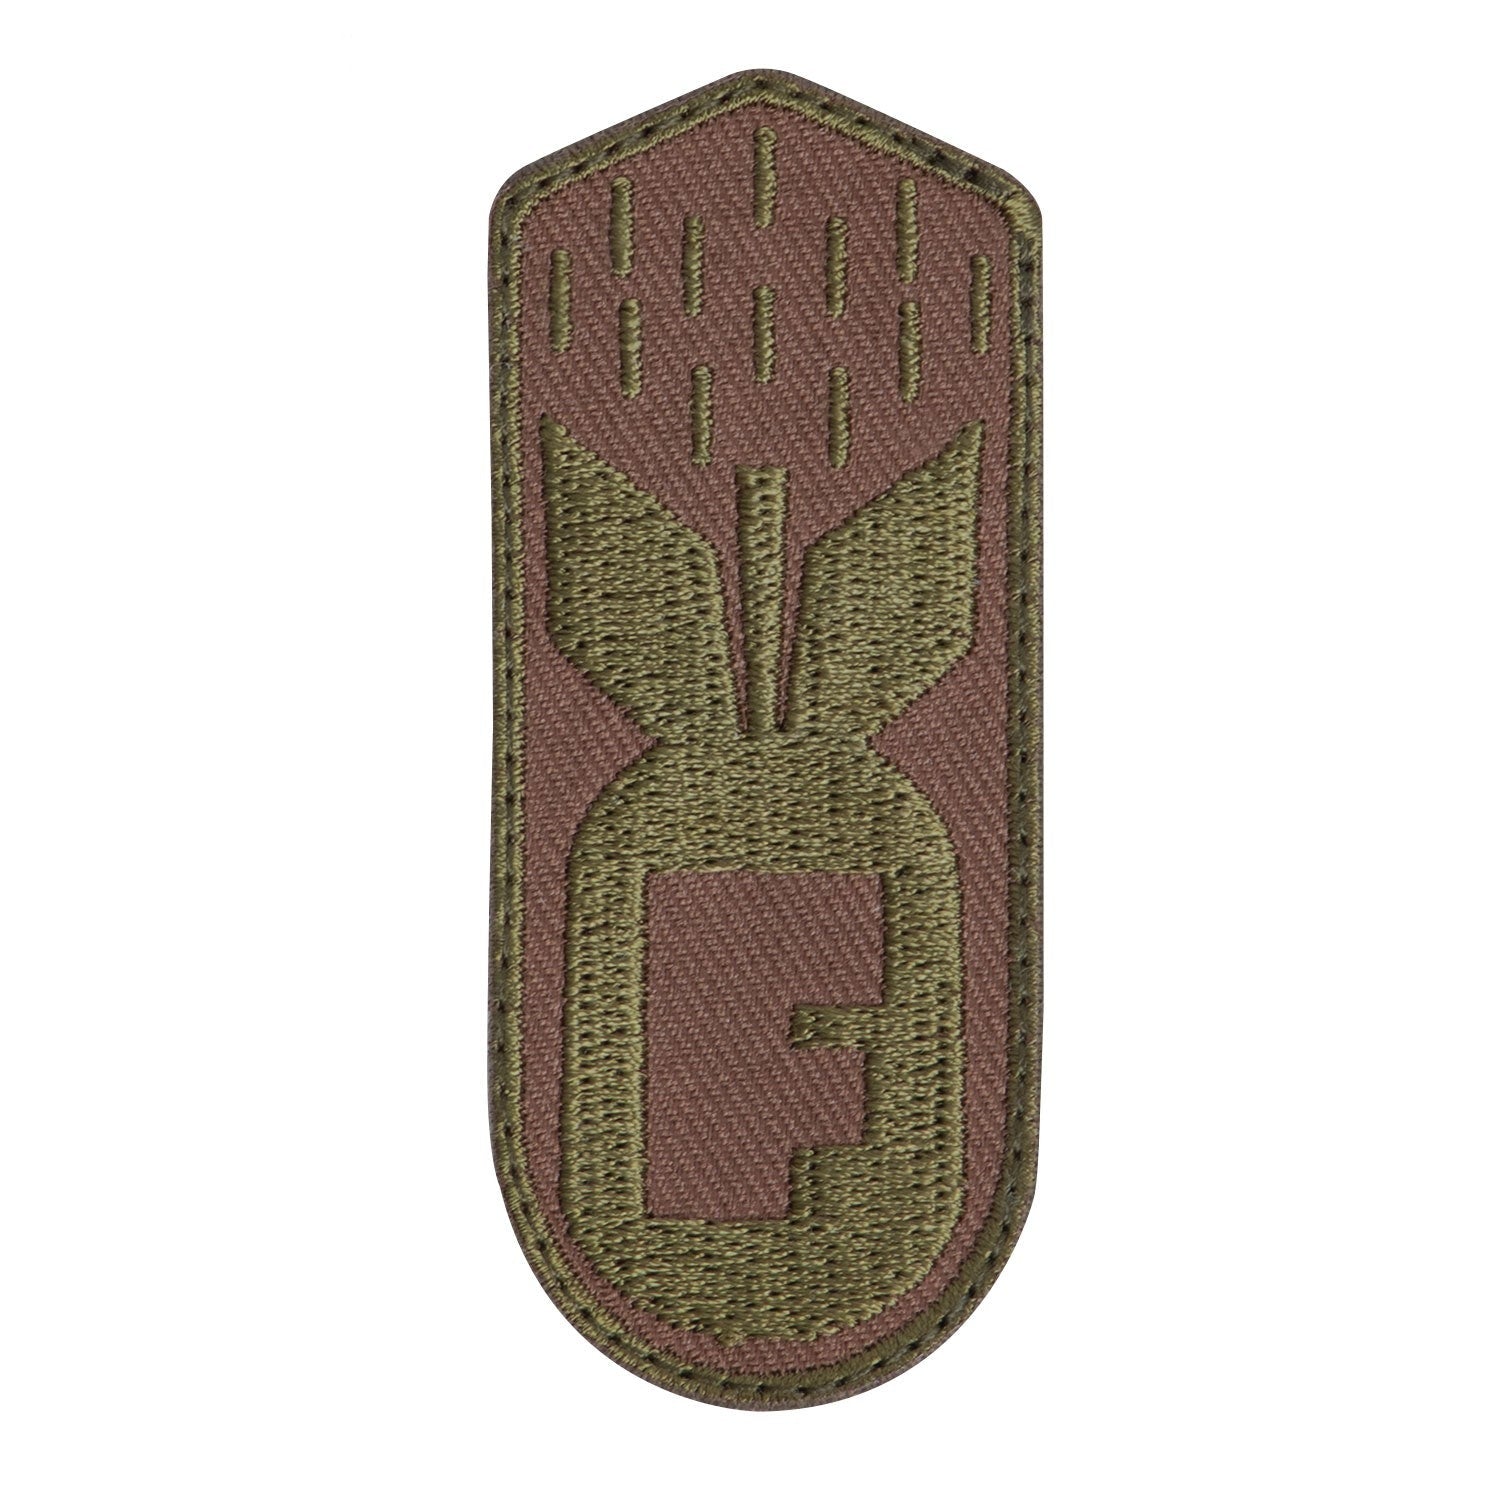  F-Bomb Patch With Hook Back - Coyote Brown - Tactical Choice Plus